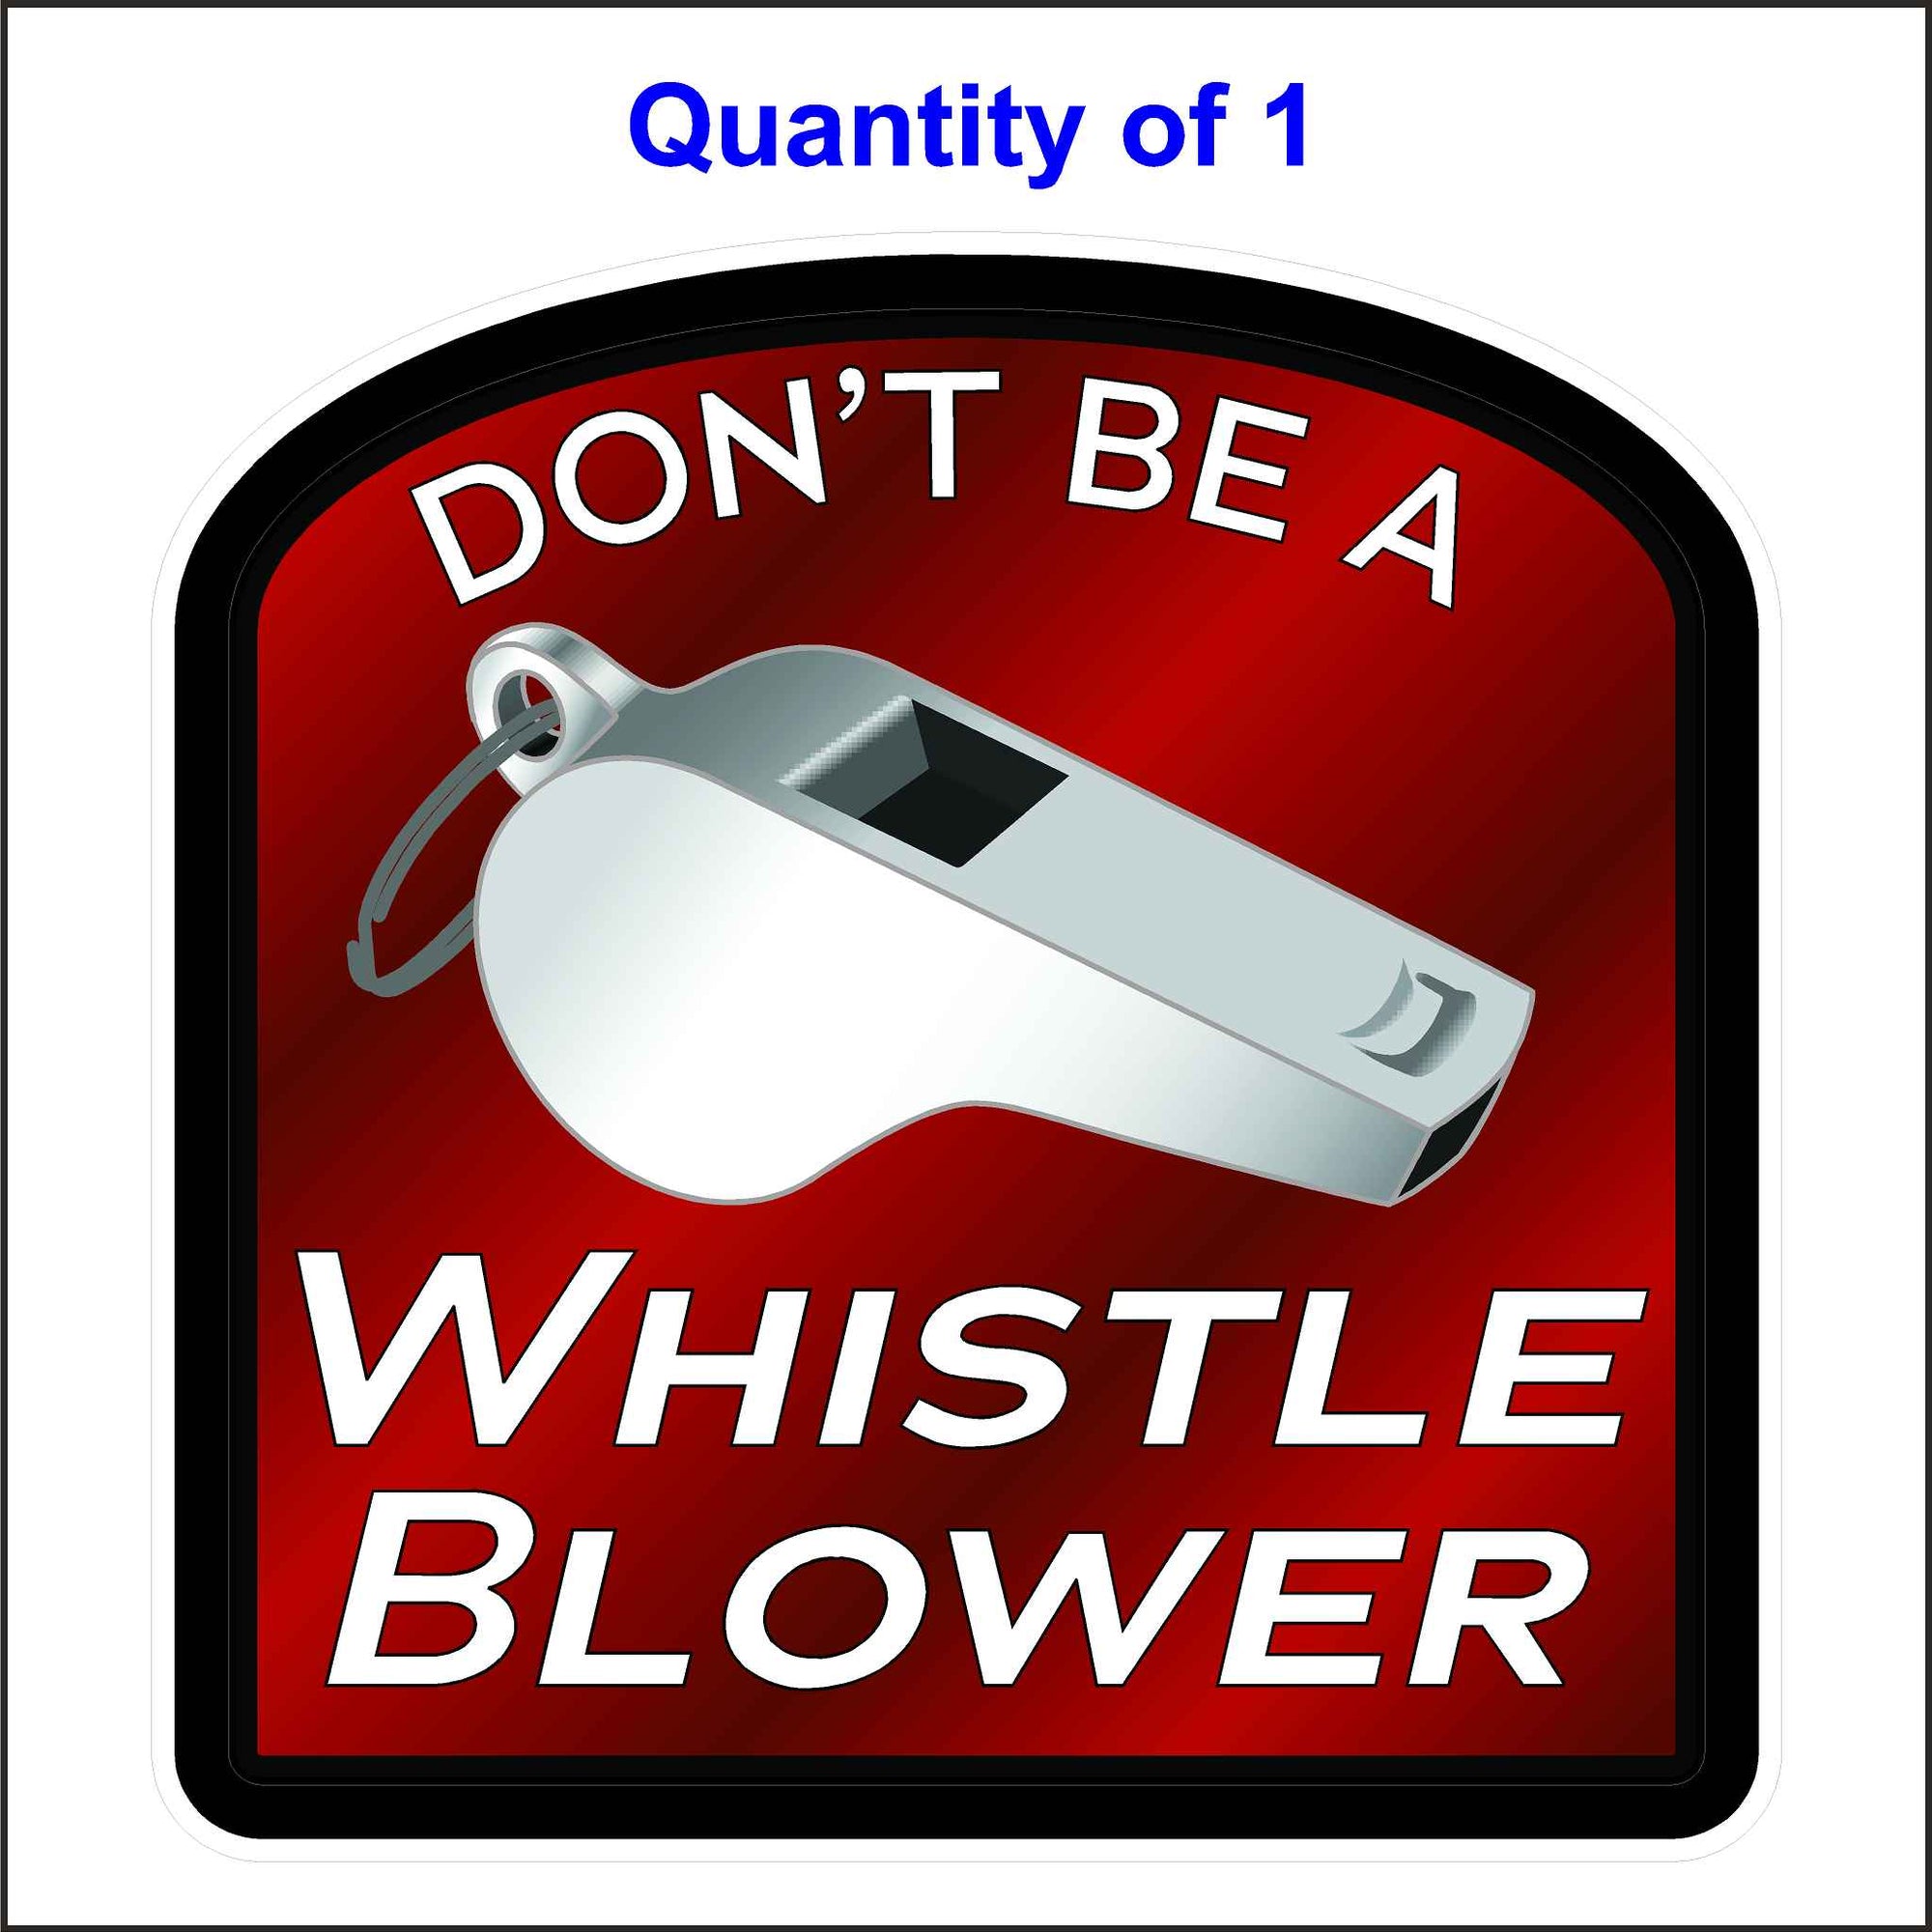 Don’t Be a Whistleblower Sticker. Red and Black With White Letters and a Silver Whistle.